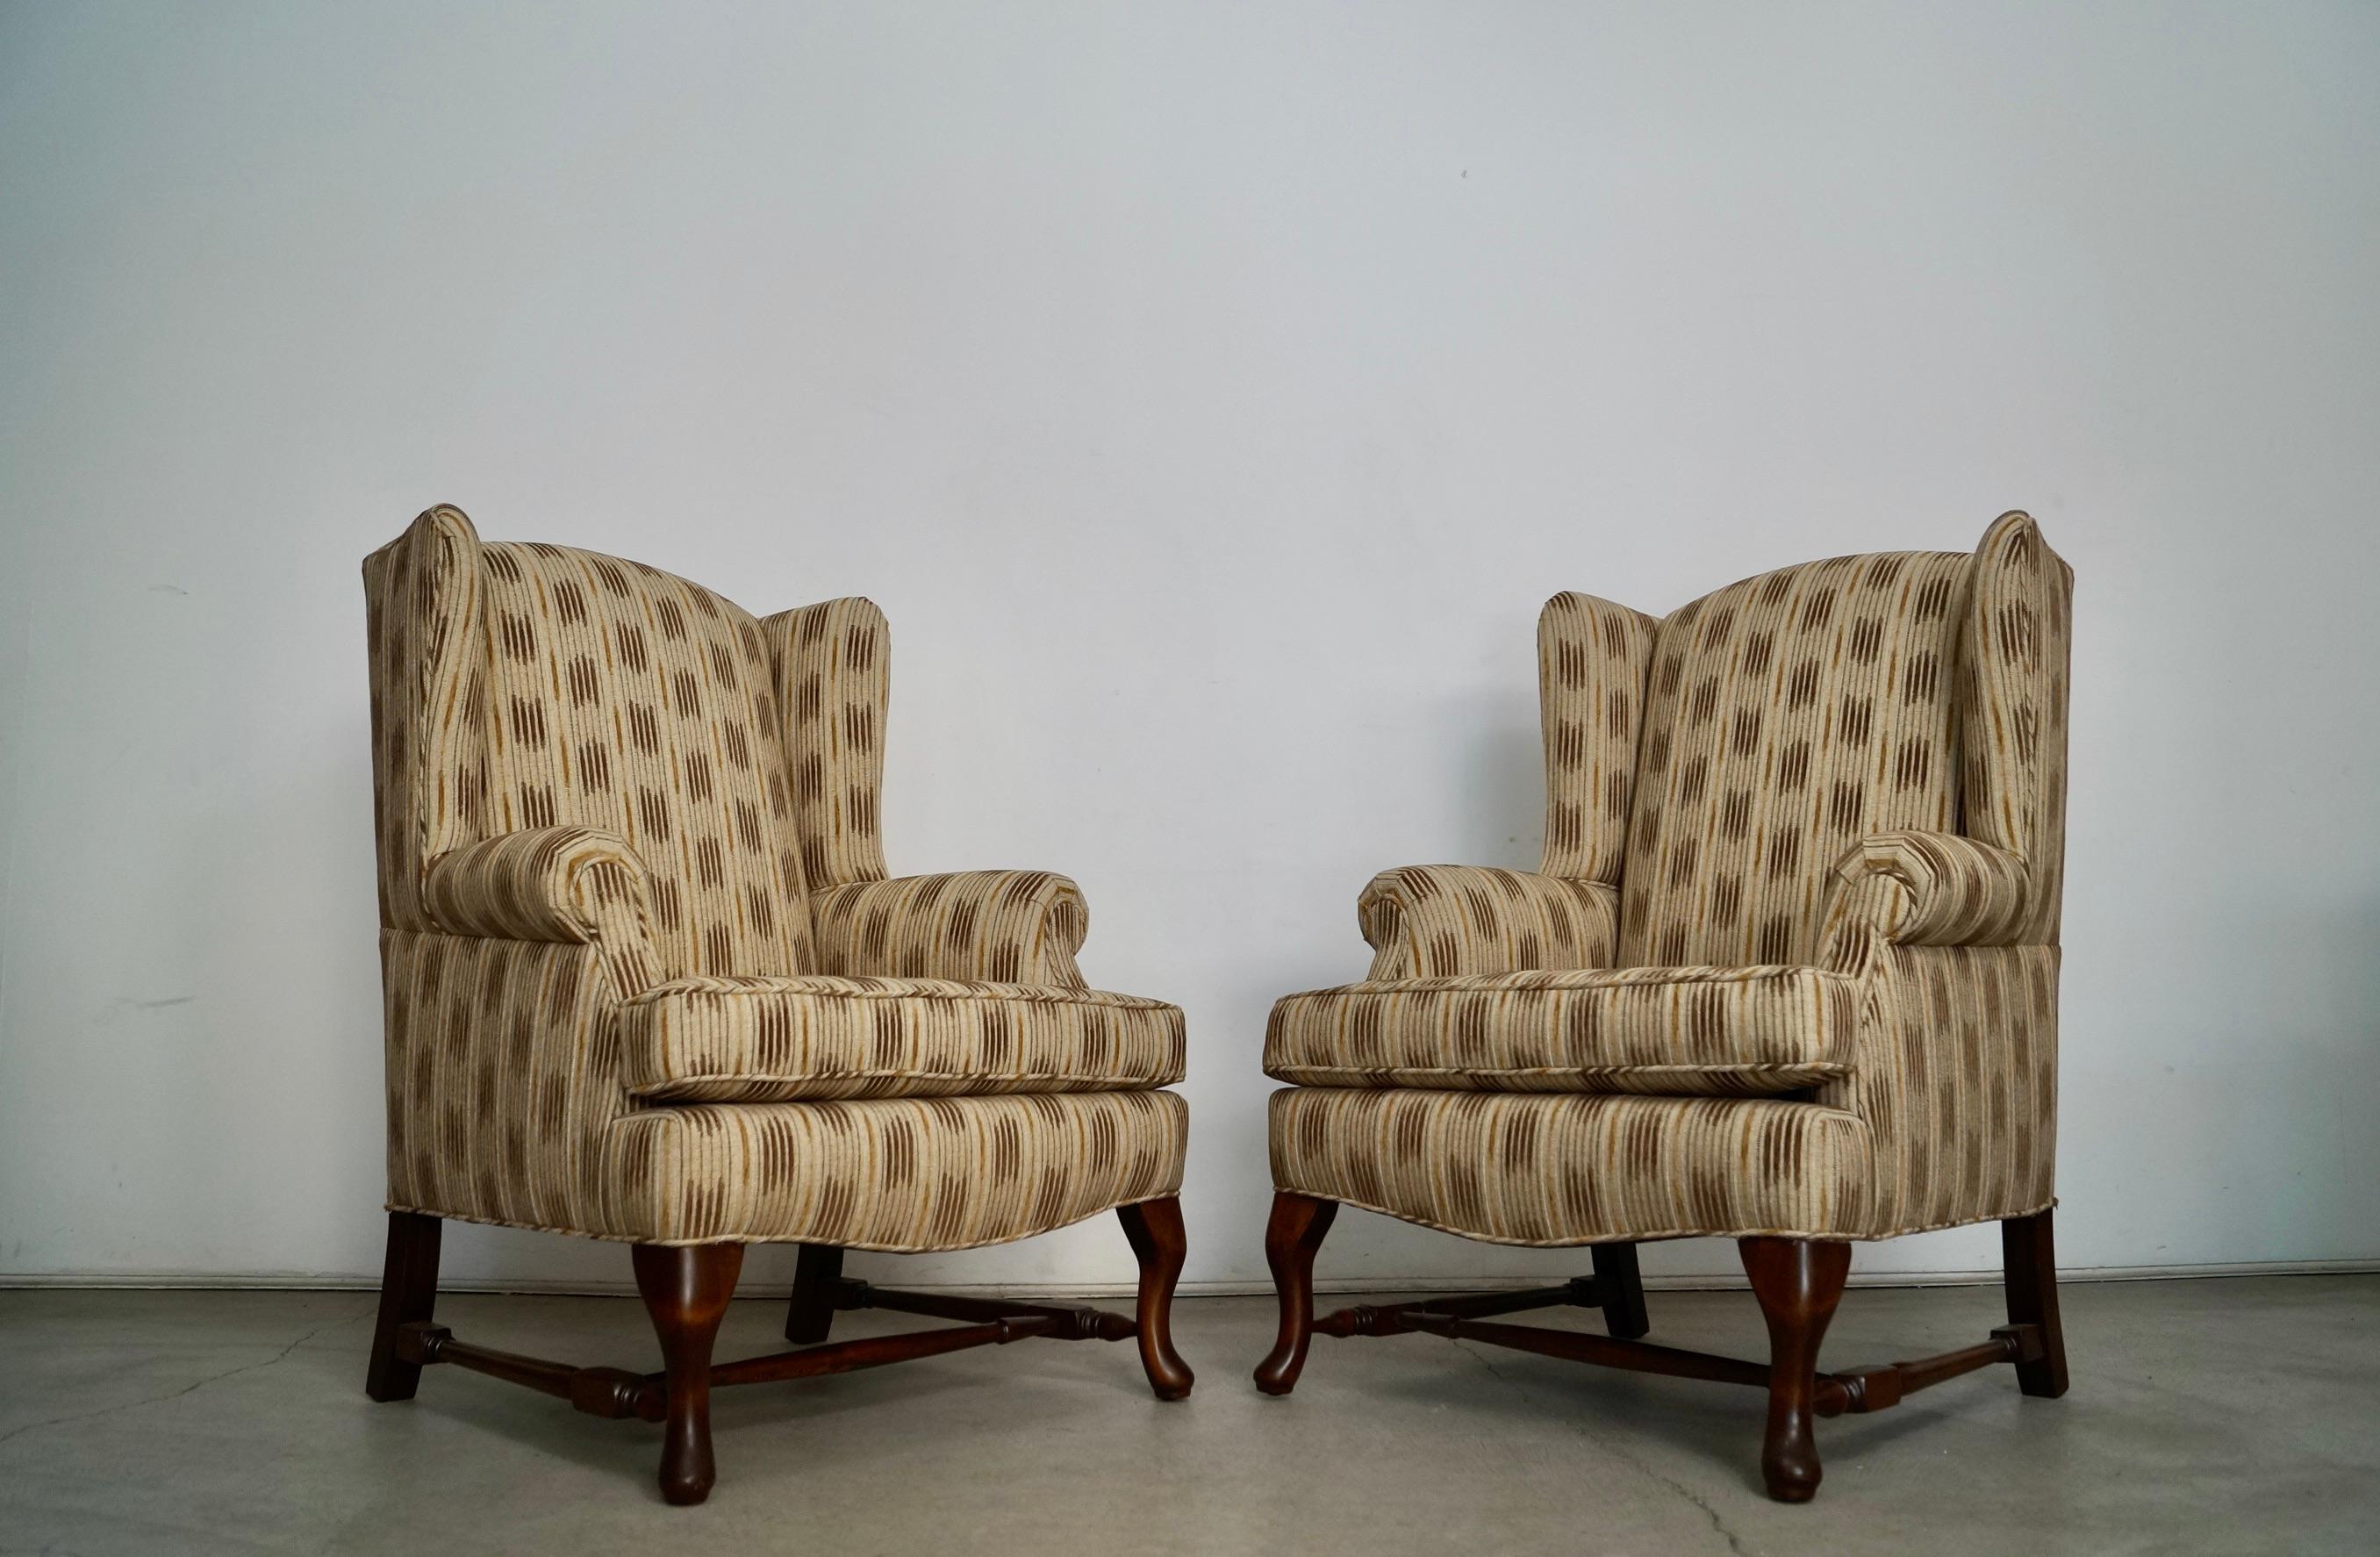 Fabric 1970's Wingback Chairs Refinished & Reupholstered - a Pair For Sale